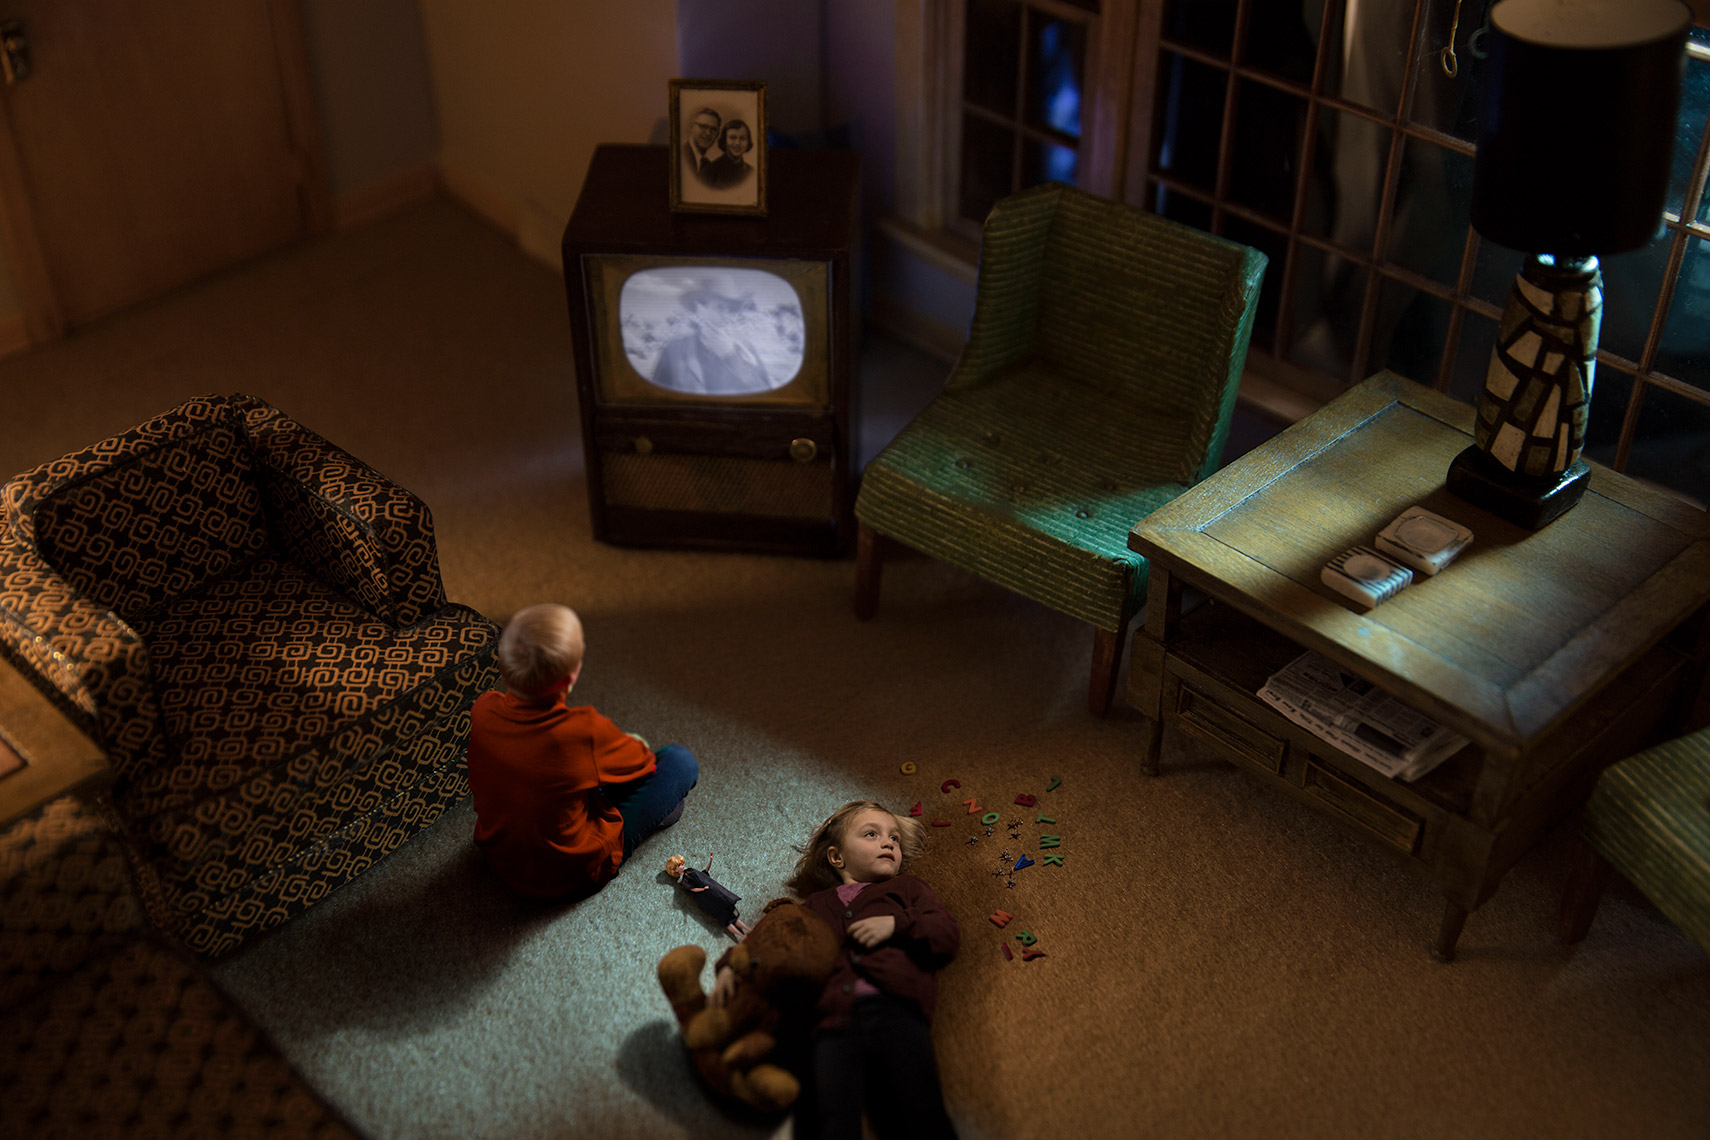 1960s re-creation of brother and sister in suburban living room in the evening, the boy watching a western on TV and the girl daydreaming on the floor with her teddy bear.